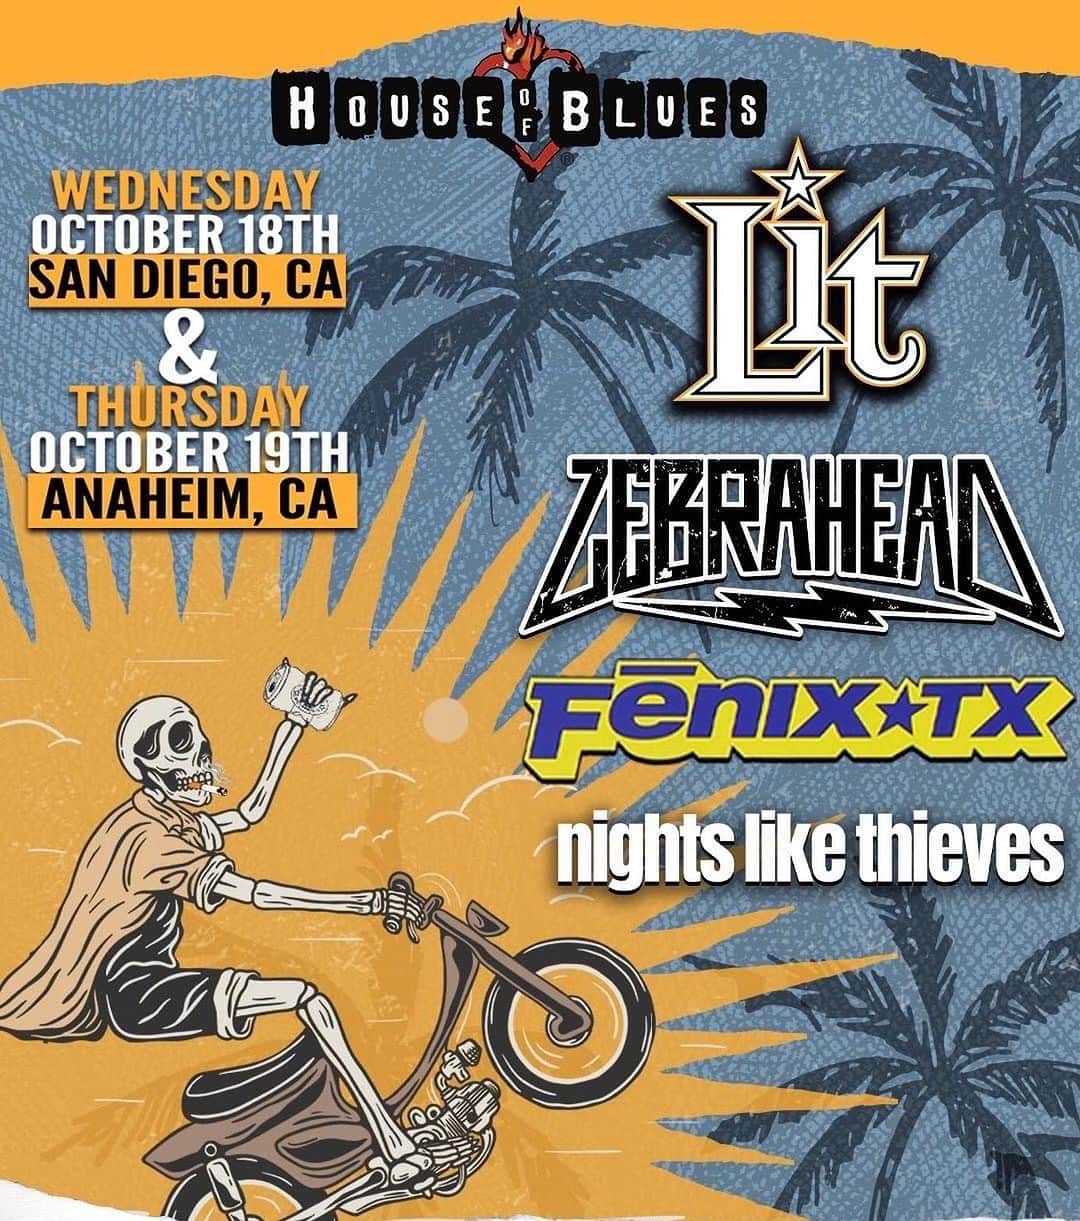 Zebraheadのインスタグラム：「A week from today this little mini run of shows is happening...... Getting excited!! Who we gonna be hanging out with?  Get your tickets to the HOB shows asap.  October 18th - HOB - San Diego, CA - w/Lit, Fenix Tx and Nights like Thieves October 19th - HOB - Anaheim CA - w/Lit, Fenix Tx and Nights like Thieves October 21st - When We Were Young Festival - Las Vegas, NV - w/everyone October 22nd - When We Were Young Festival - Las Vegas, NV - w/everyone」